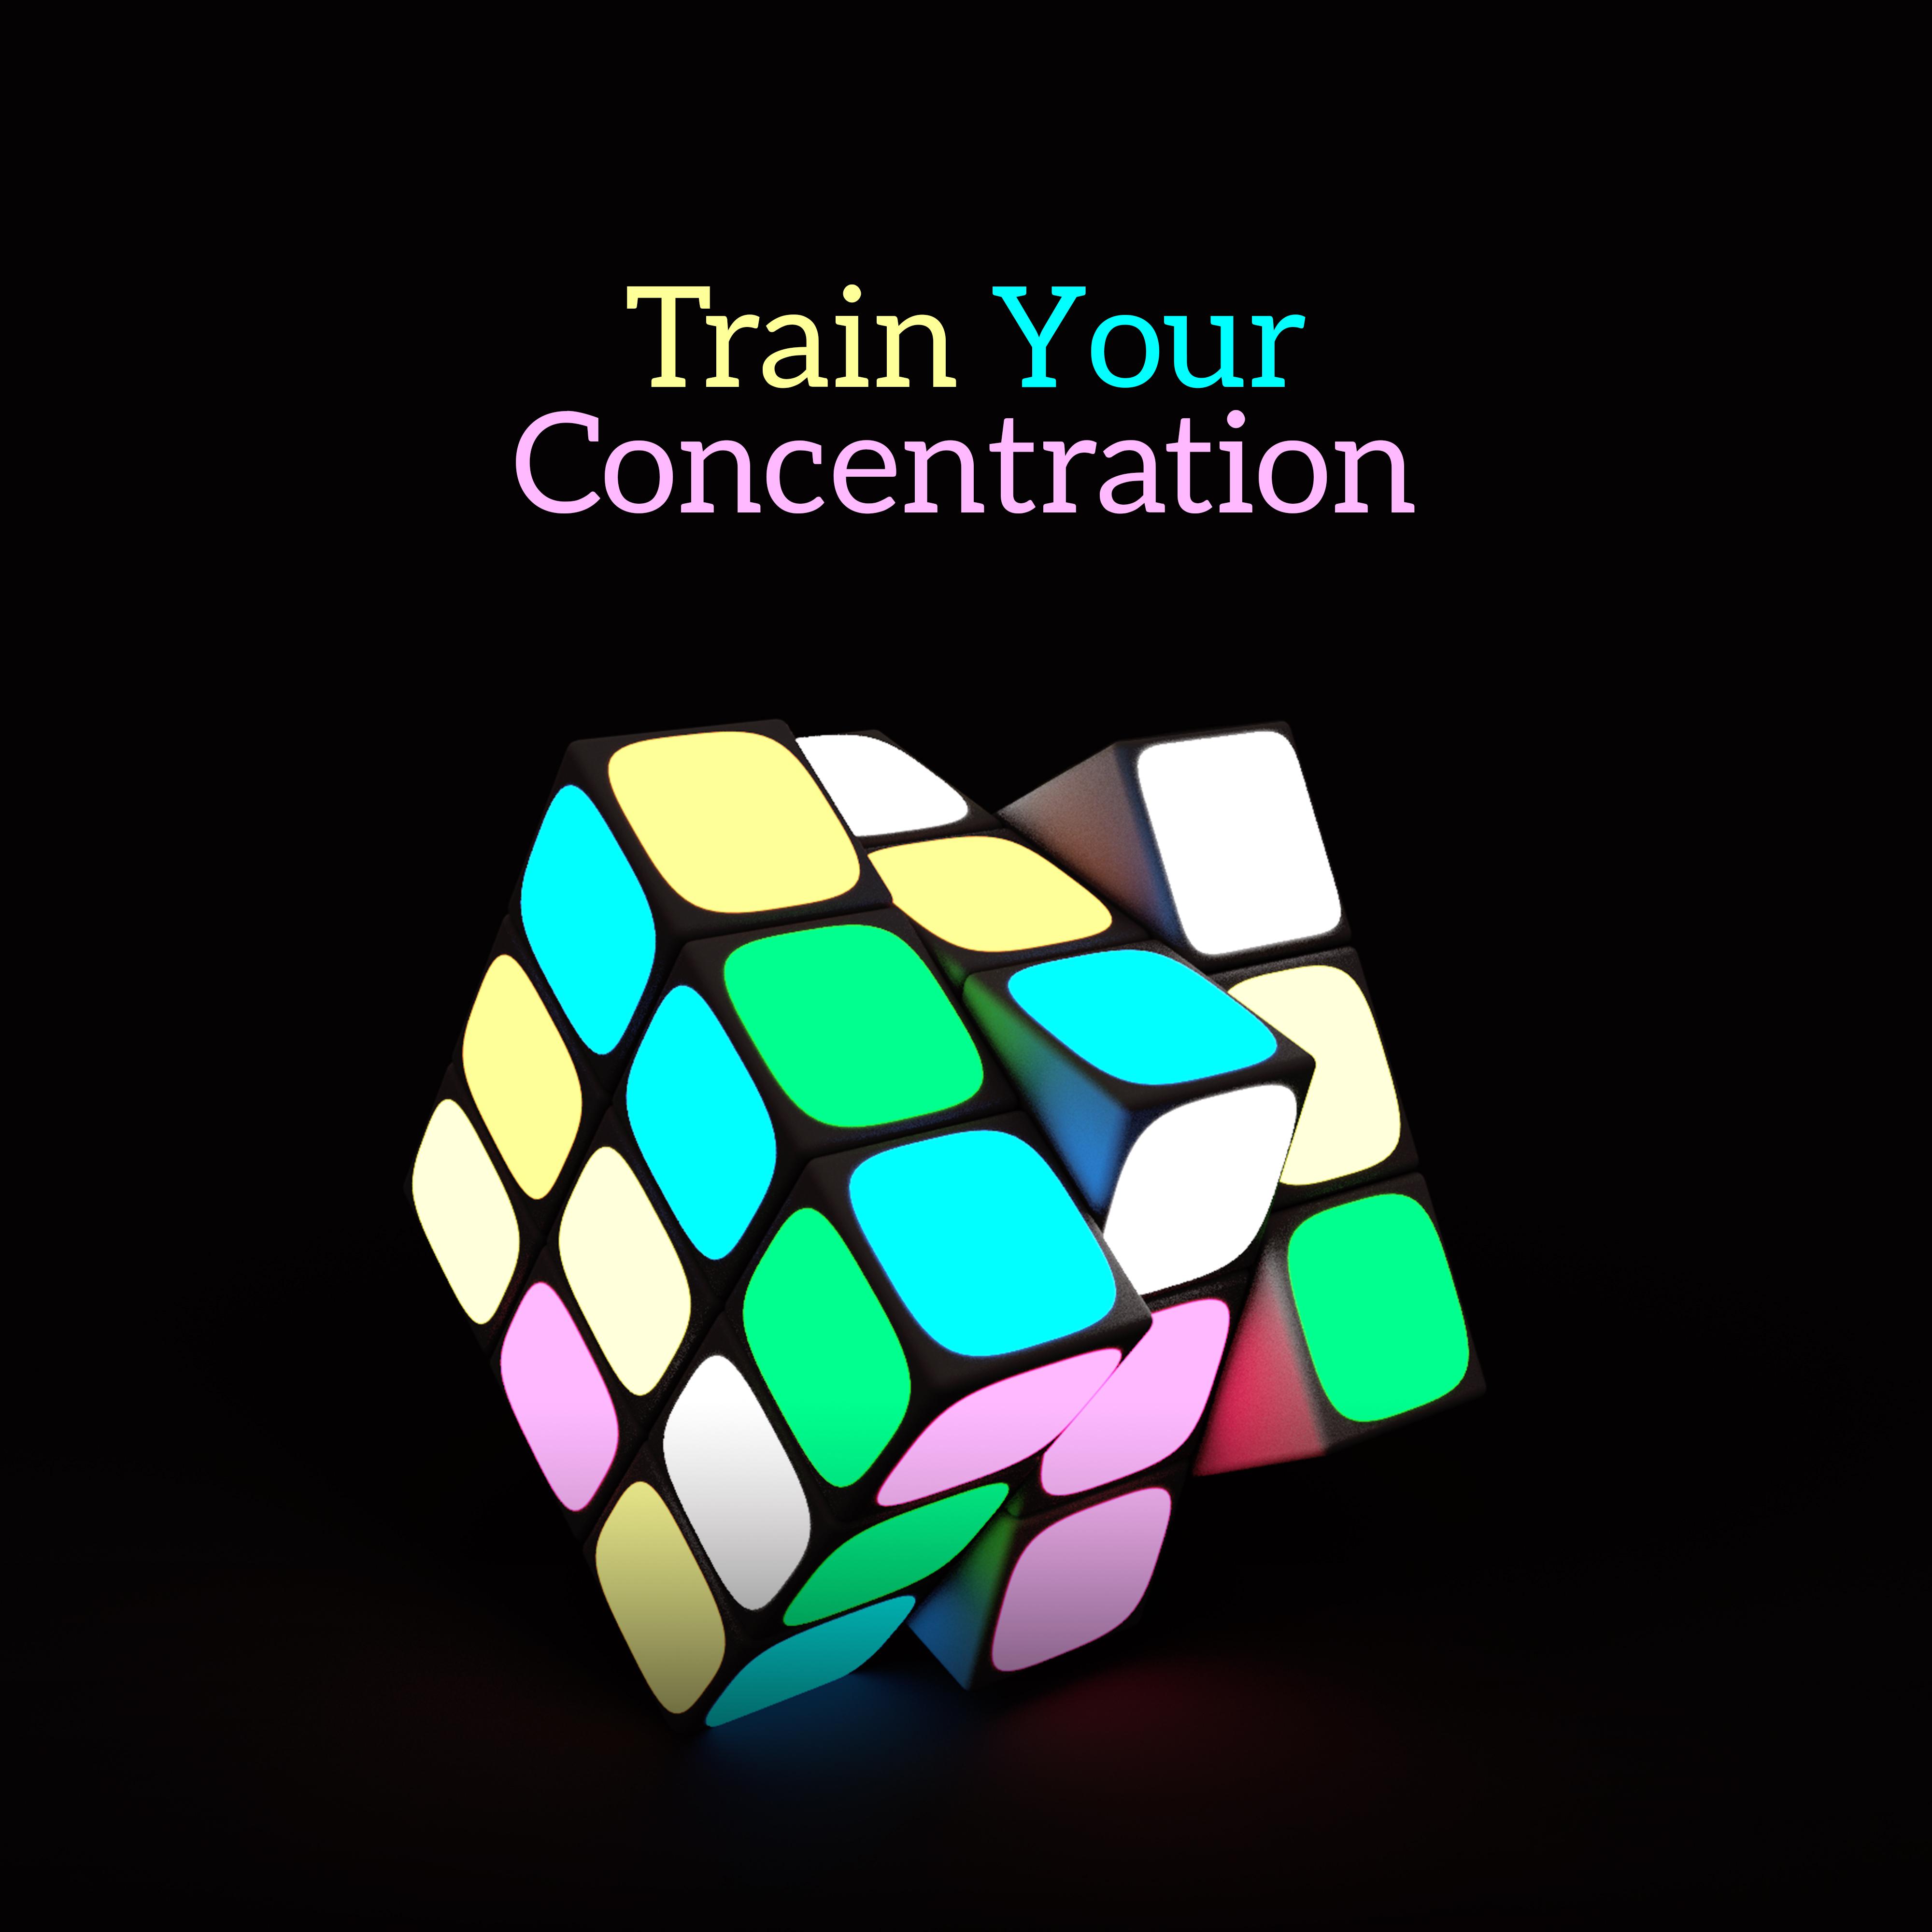 Train Your Concentration  Hatha Yoga, Inner Silence, Chakra, Deep Meditation, Nature Sounds, Tranquility